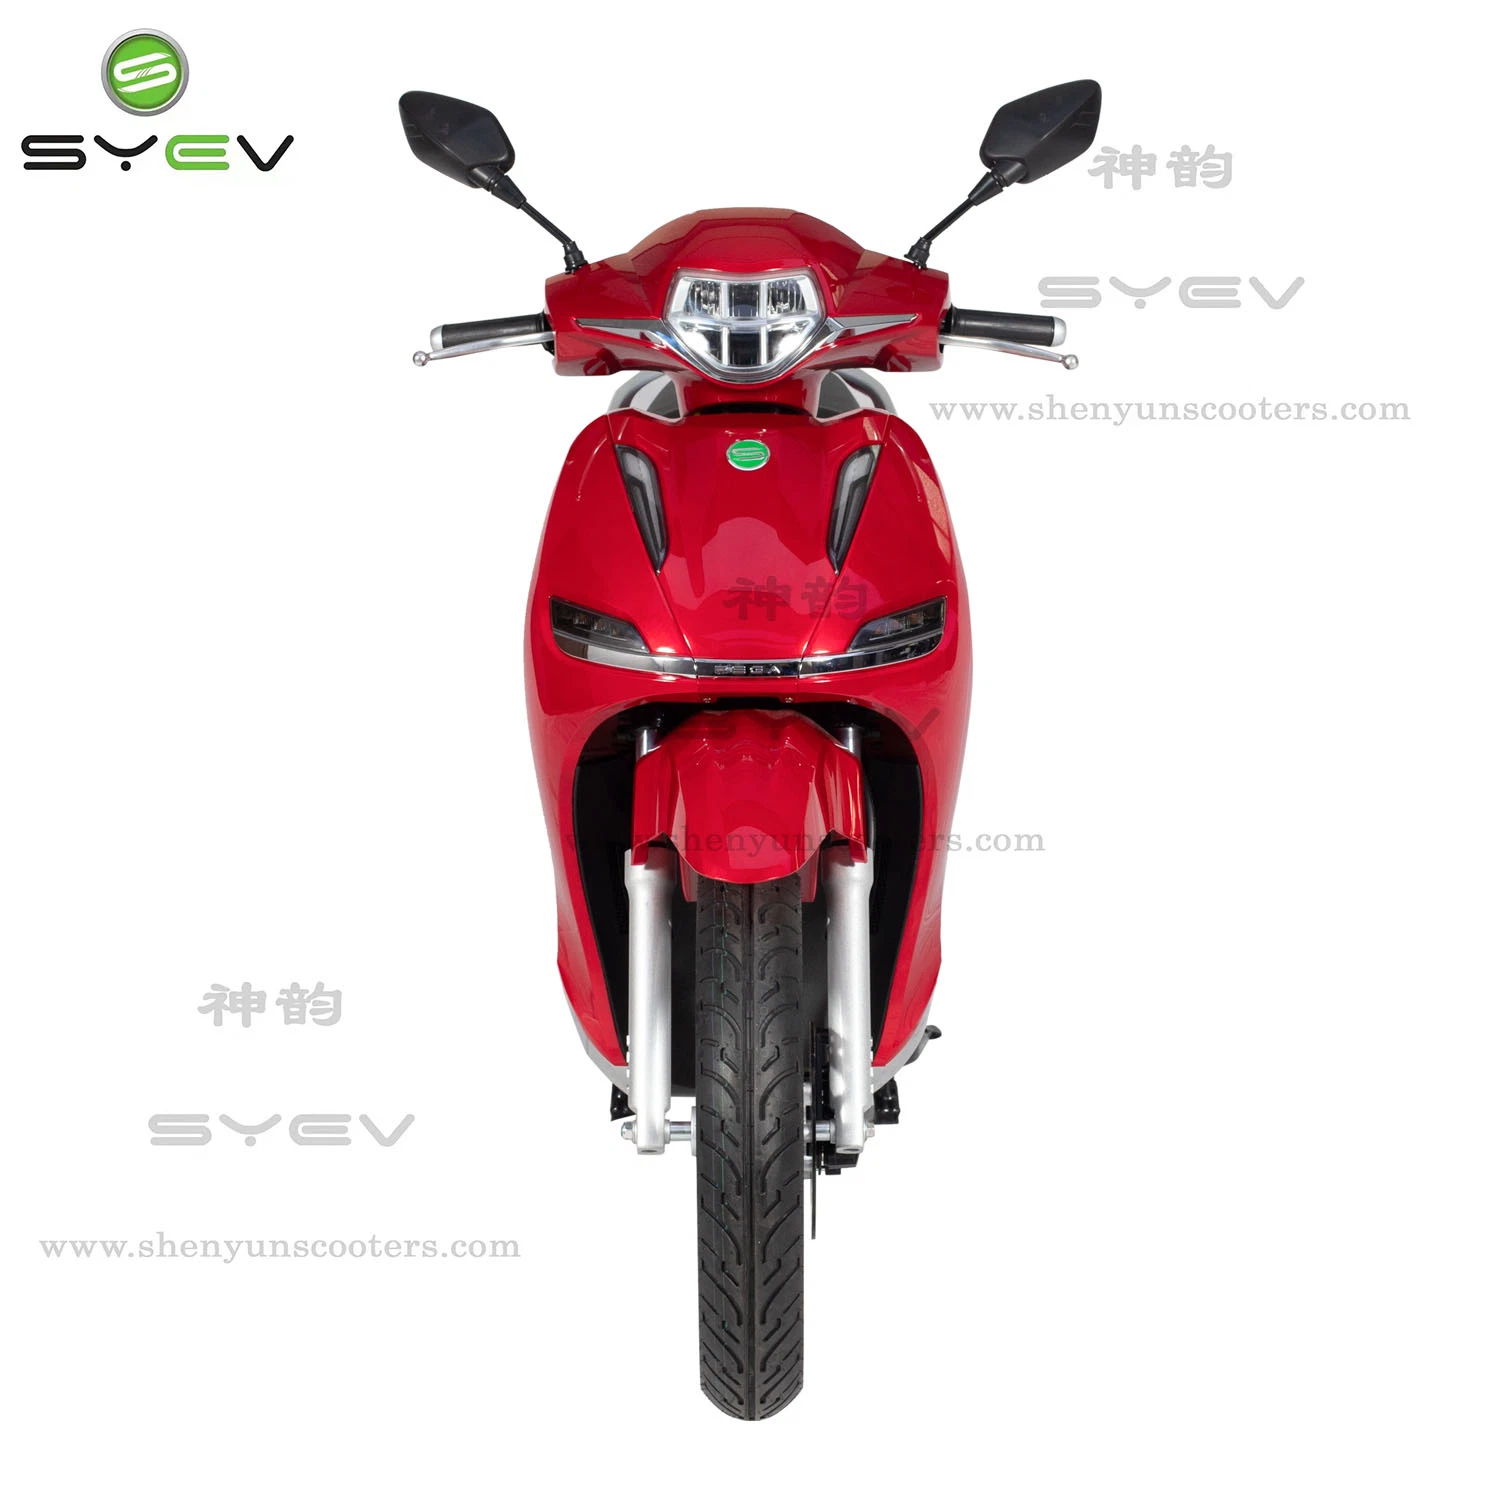 Lithium Battery 3000W Powerful Motor Electric Scooter/Motorcycle Lithium Battery Delivery Pizza 90km/H Fast Speed